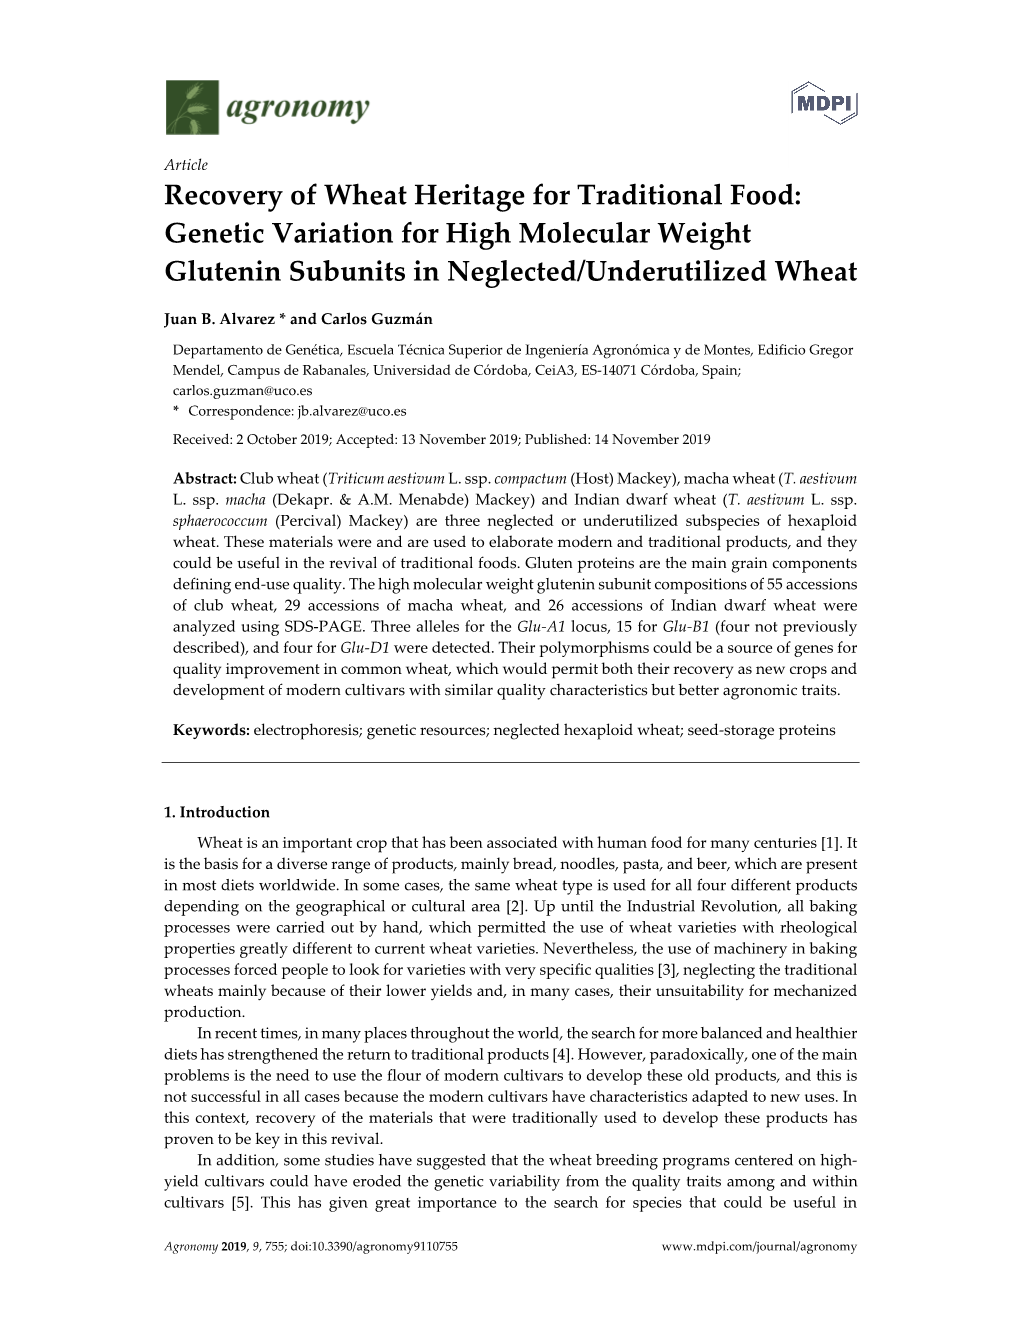 Recovery of Wheat Heritage for Traditional Food: Genetic Variation for High Molecular Weight Glutenin Subunits in Neglected/Underutilized Wheat